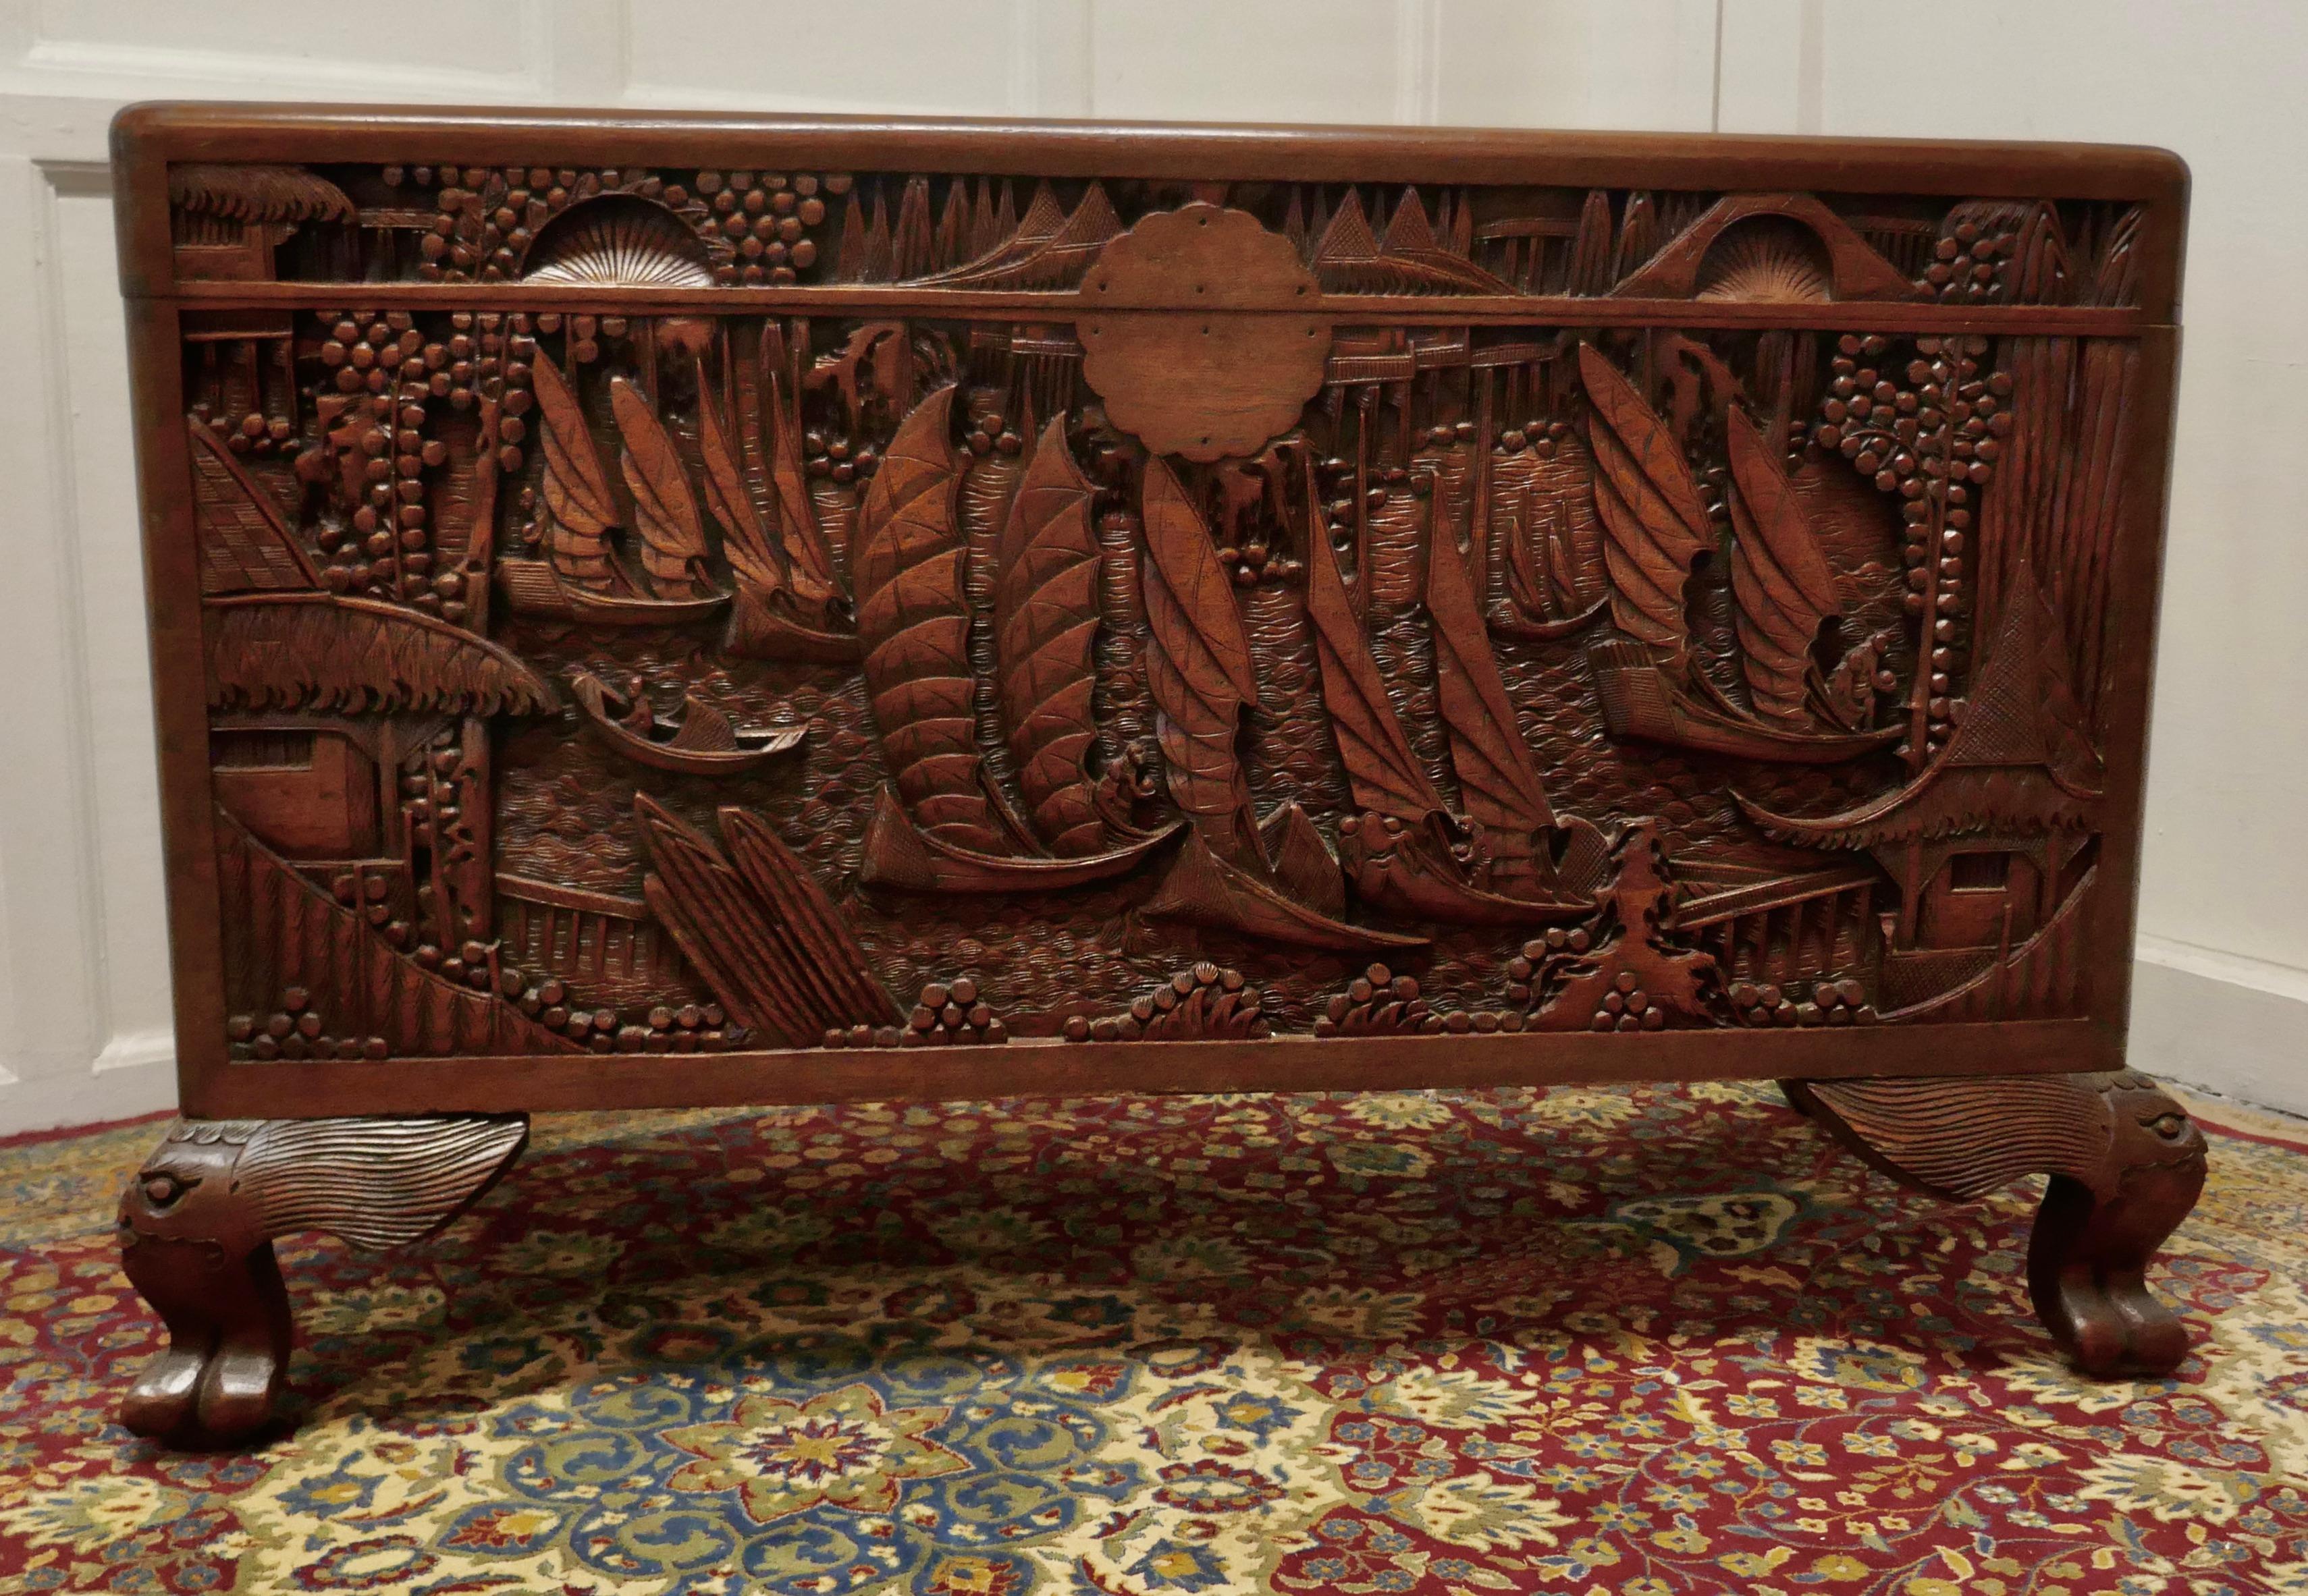 Oriental carved Camphor wood chest

This beautiful carved chest is made from Camphor Wood, for those of you who do not know camphor wood it looks a lot like Mahogany it is a hard wood which lends itself very well to carving.

However the main